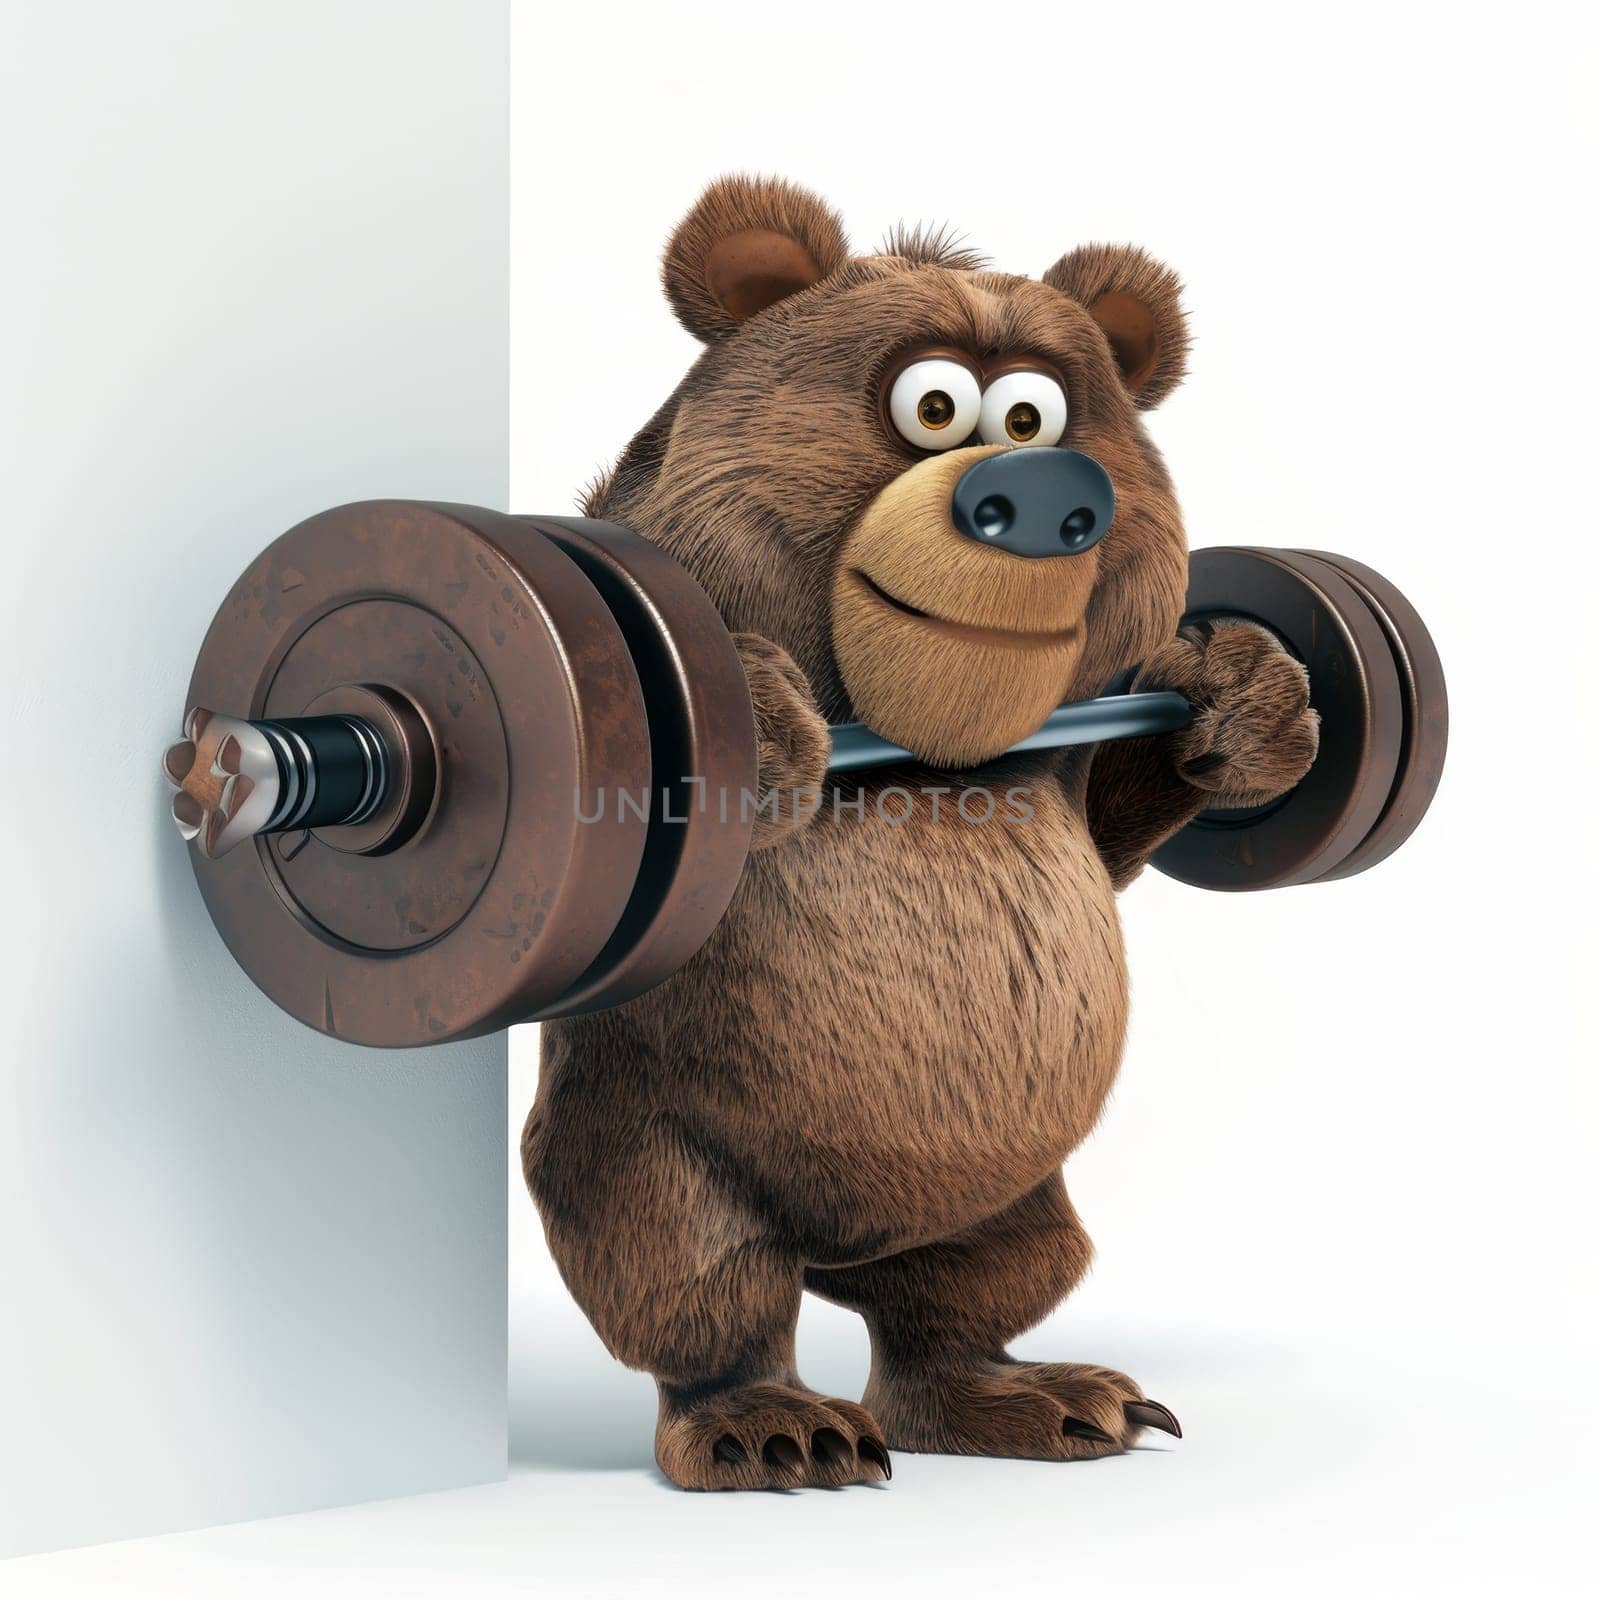 a bear with dumbbells on a white background. 3d illustration.